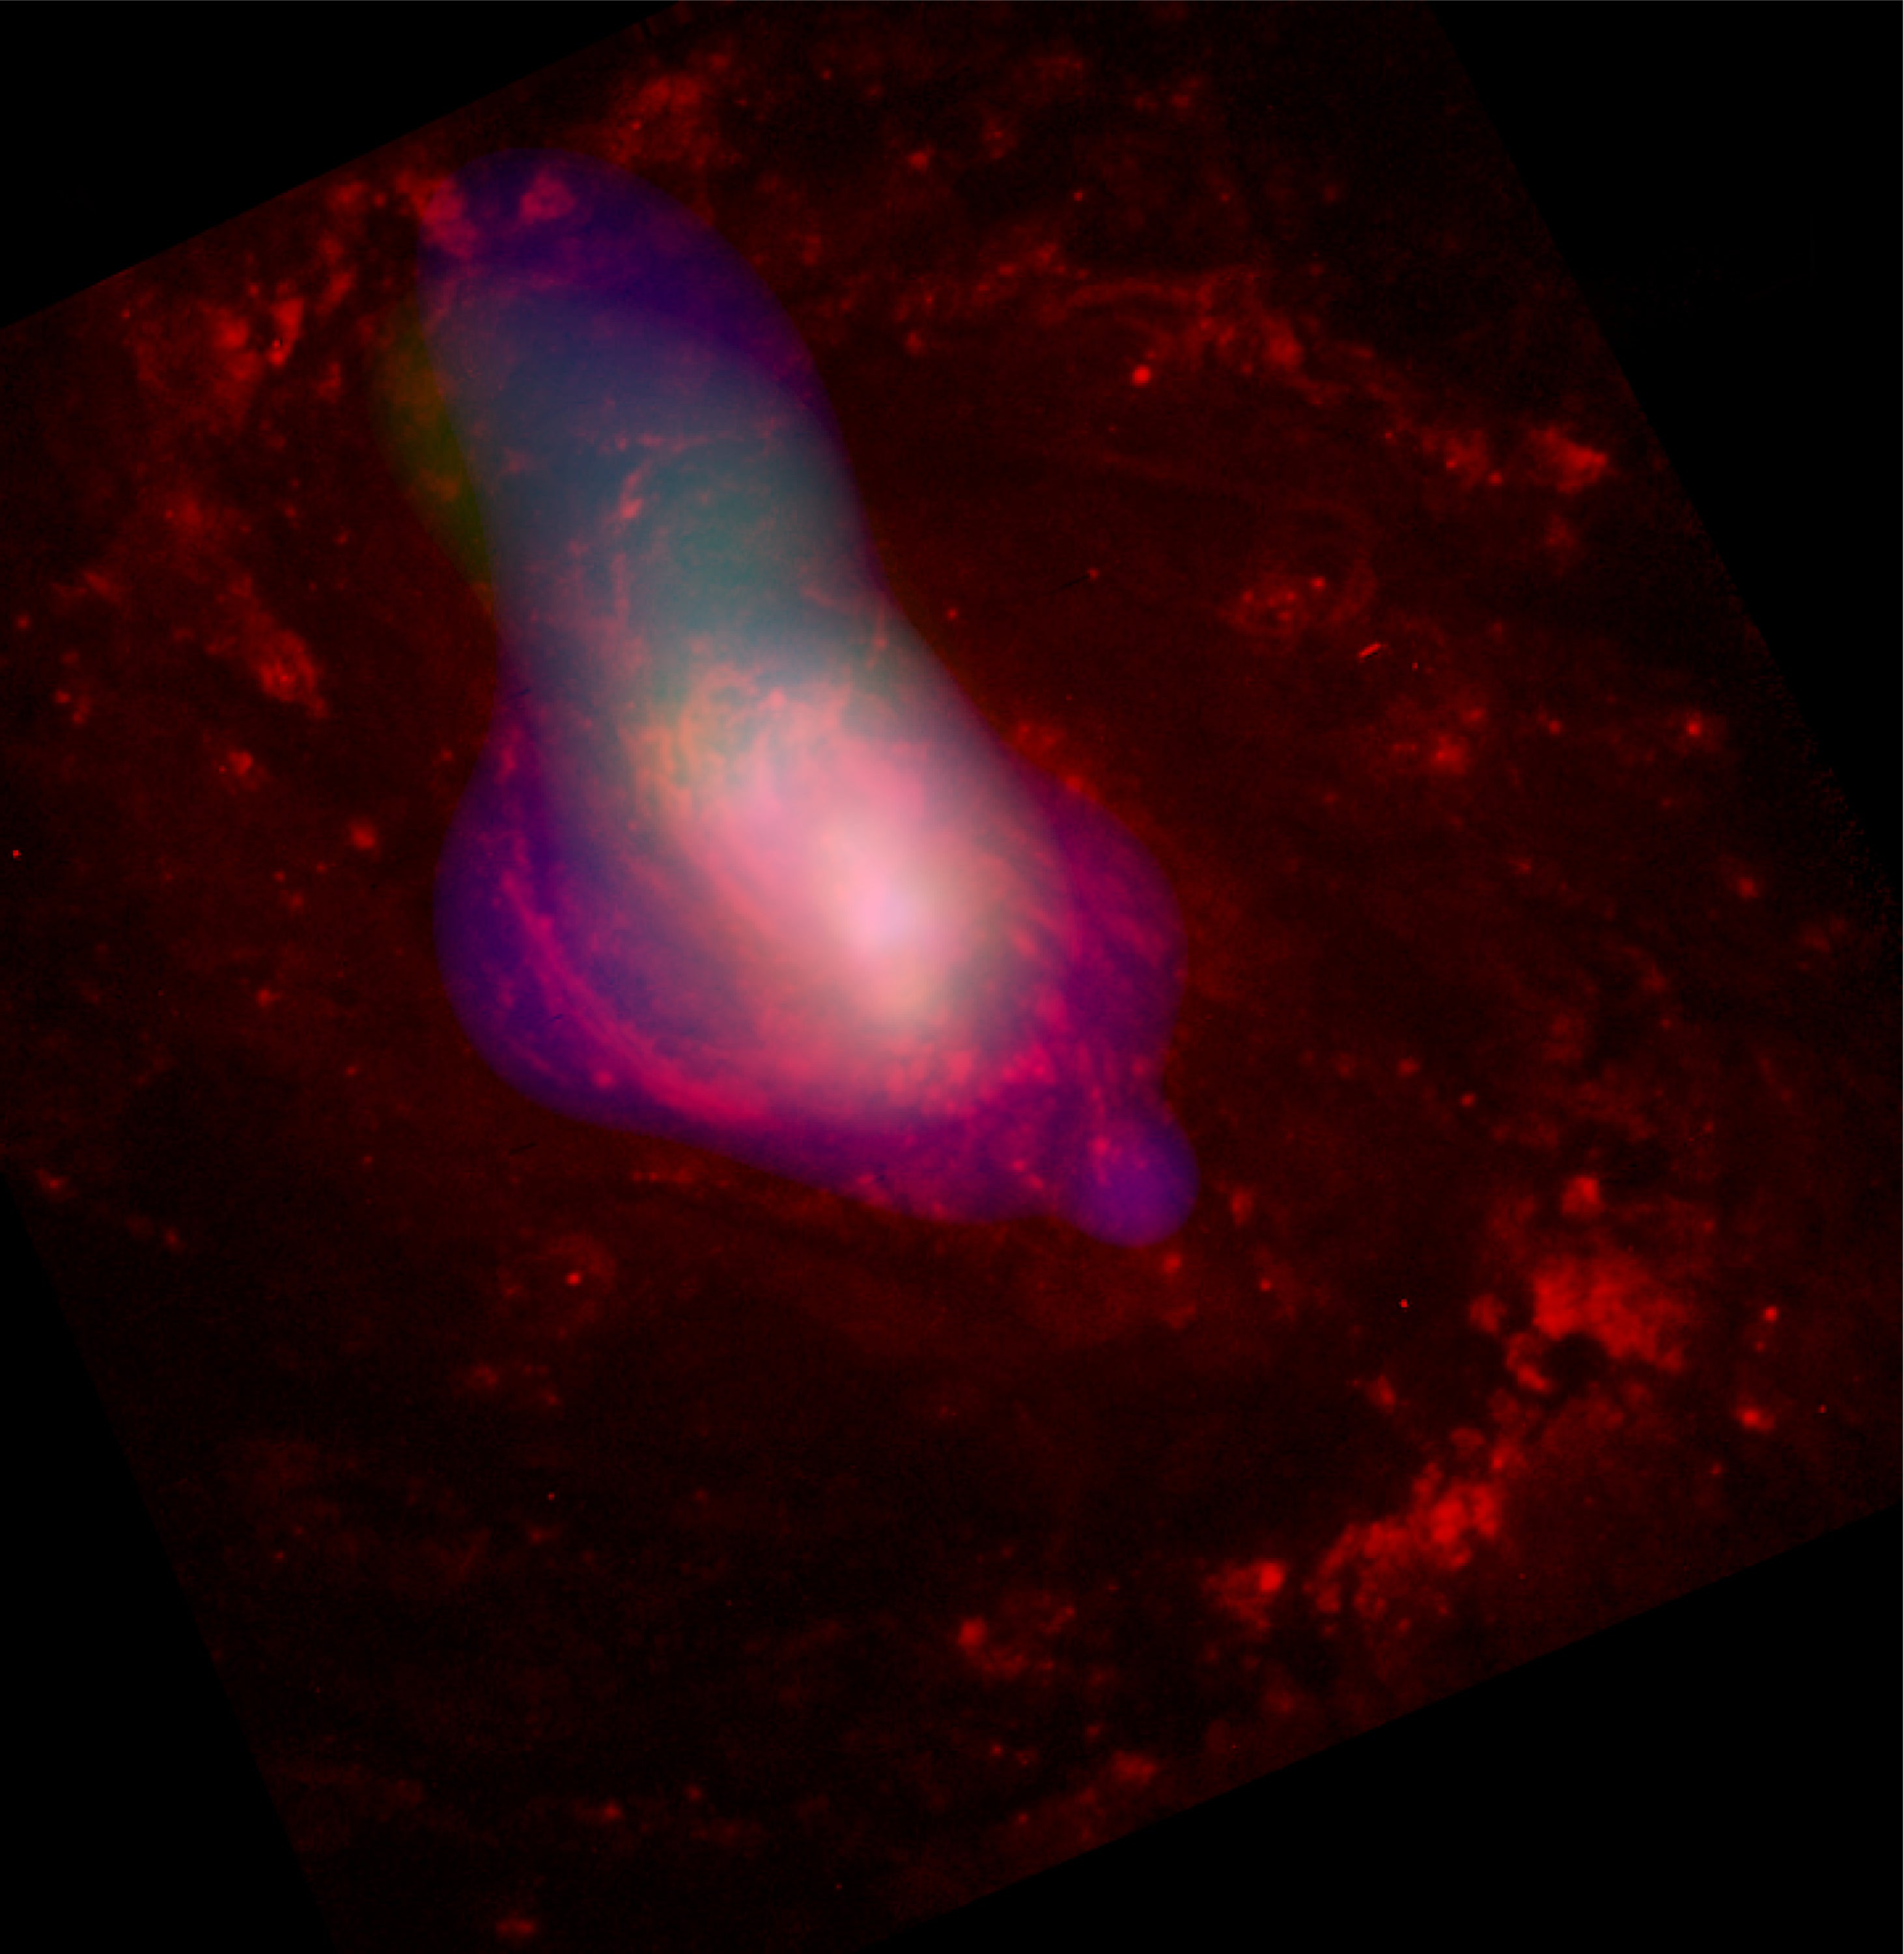 A white gass cloud is blown out from the center of active galaxy Messier 77, presumably by the supermassive black hole that lurks in its core.